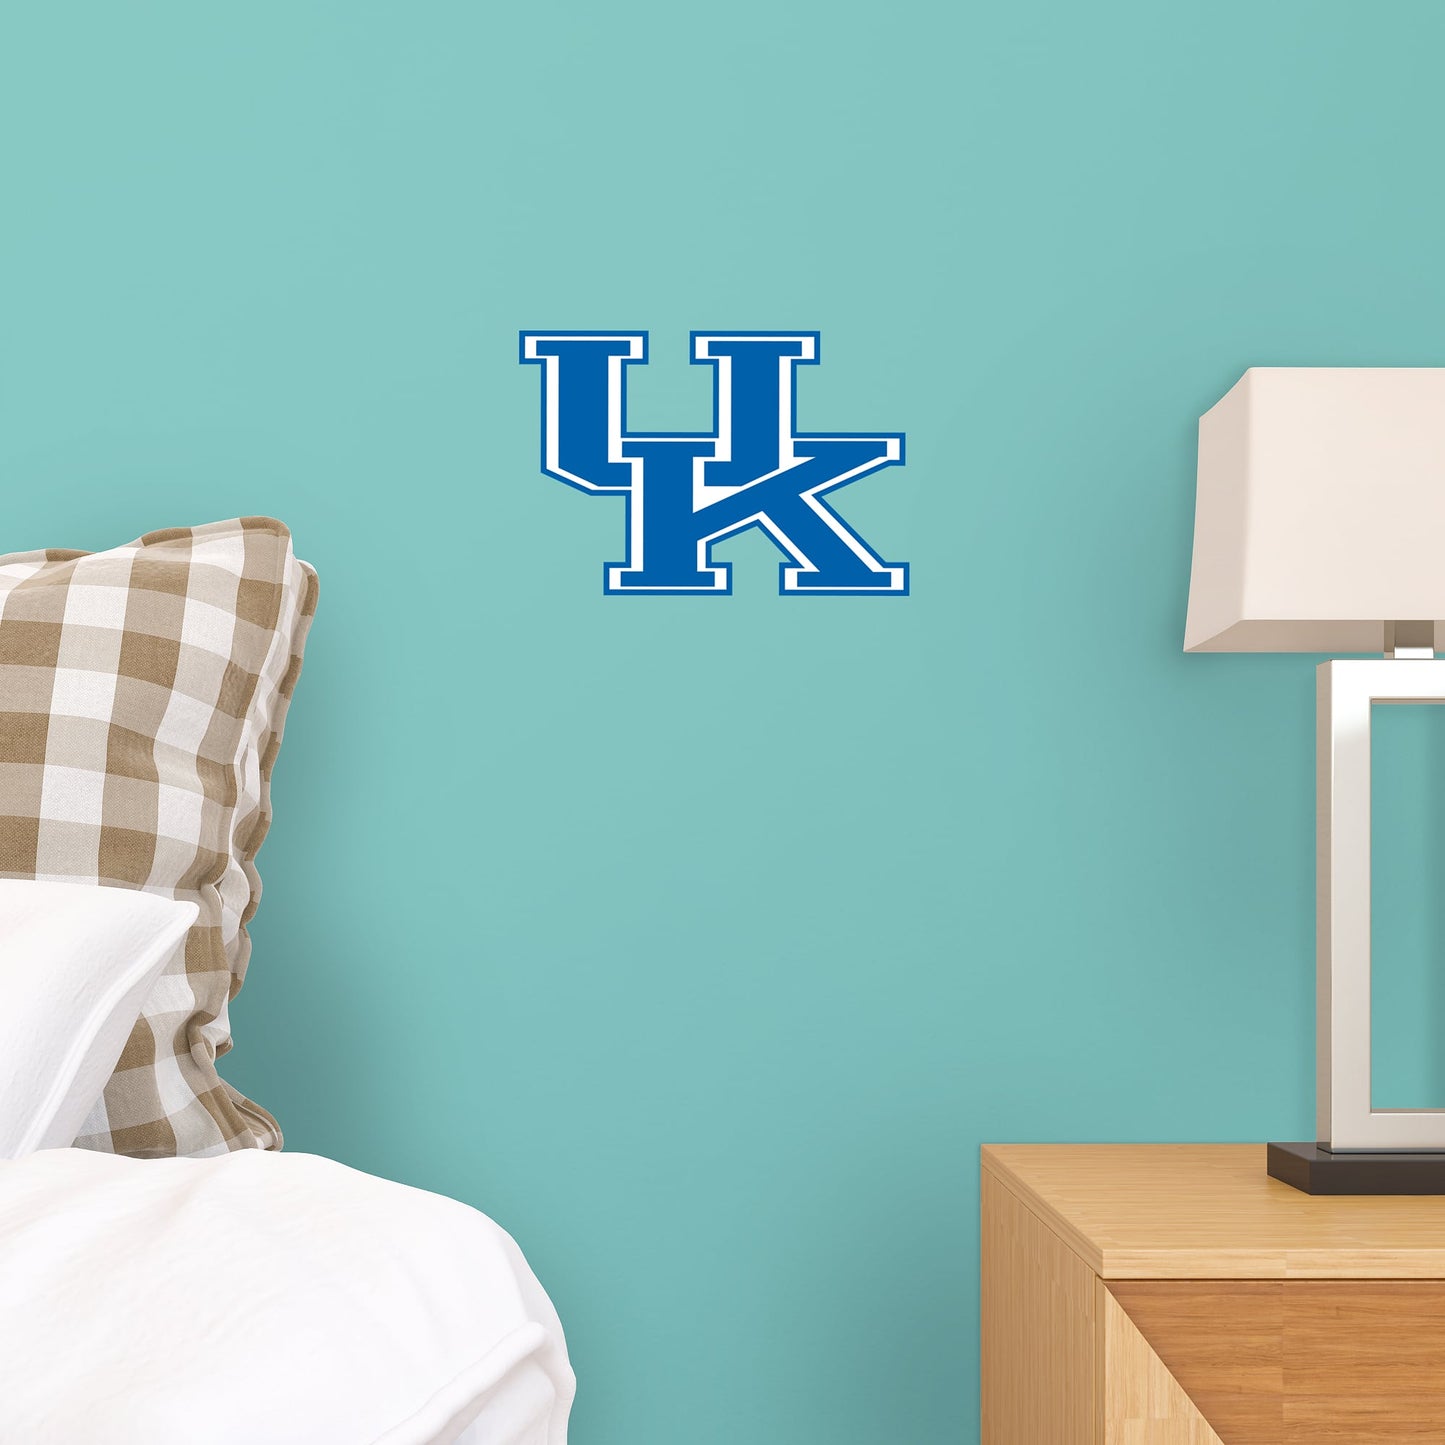 Kentucky Wildcats: Logo - Officially Licensed Removable Wall Decal